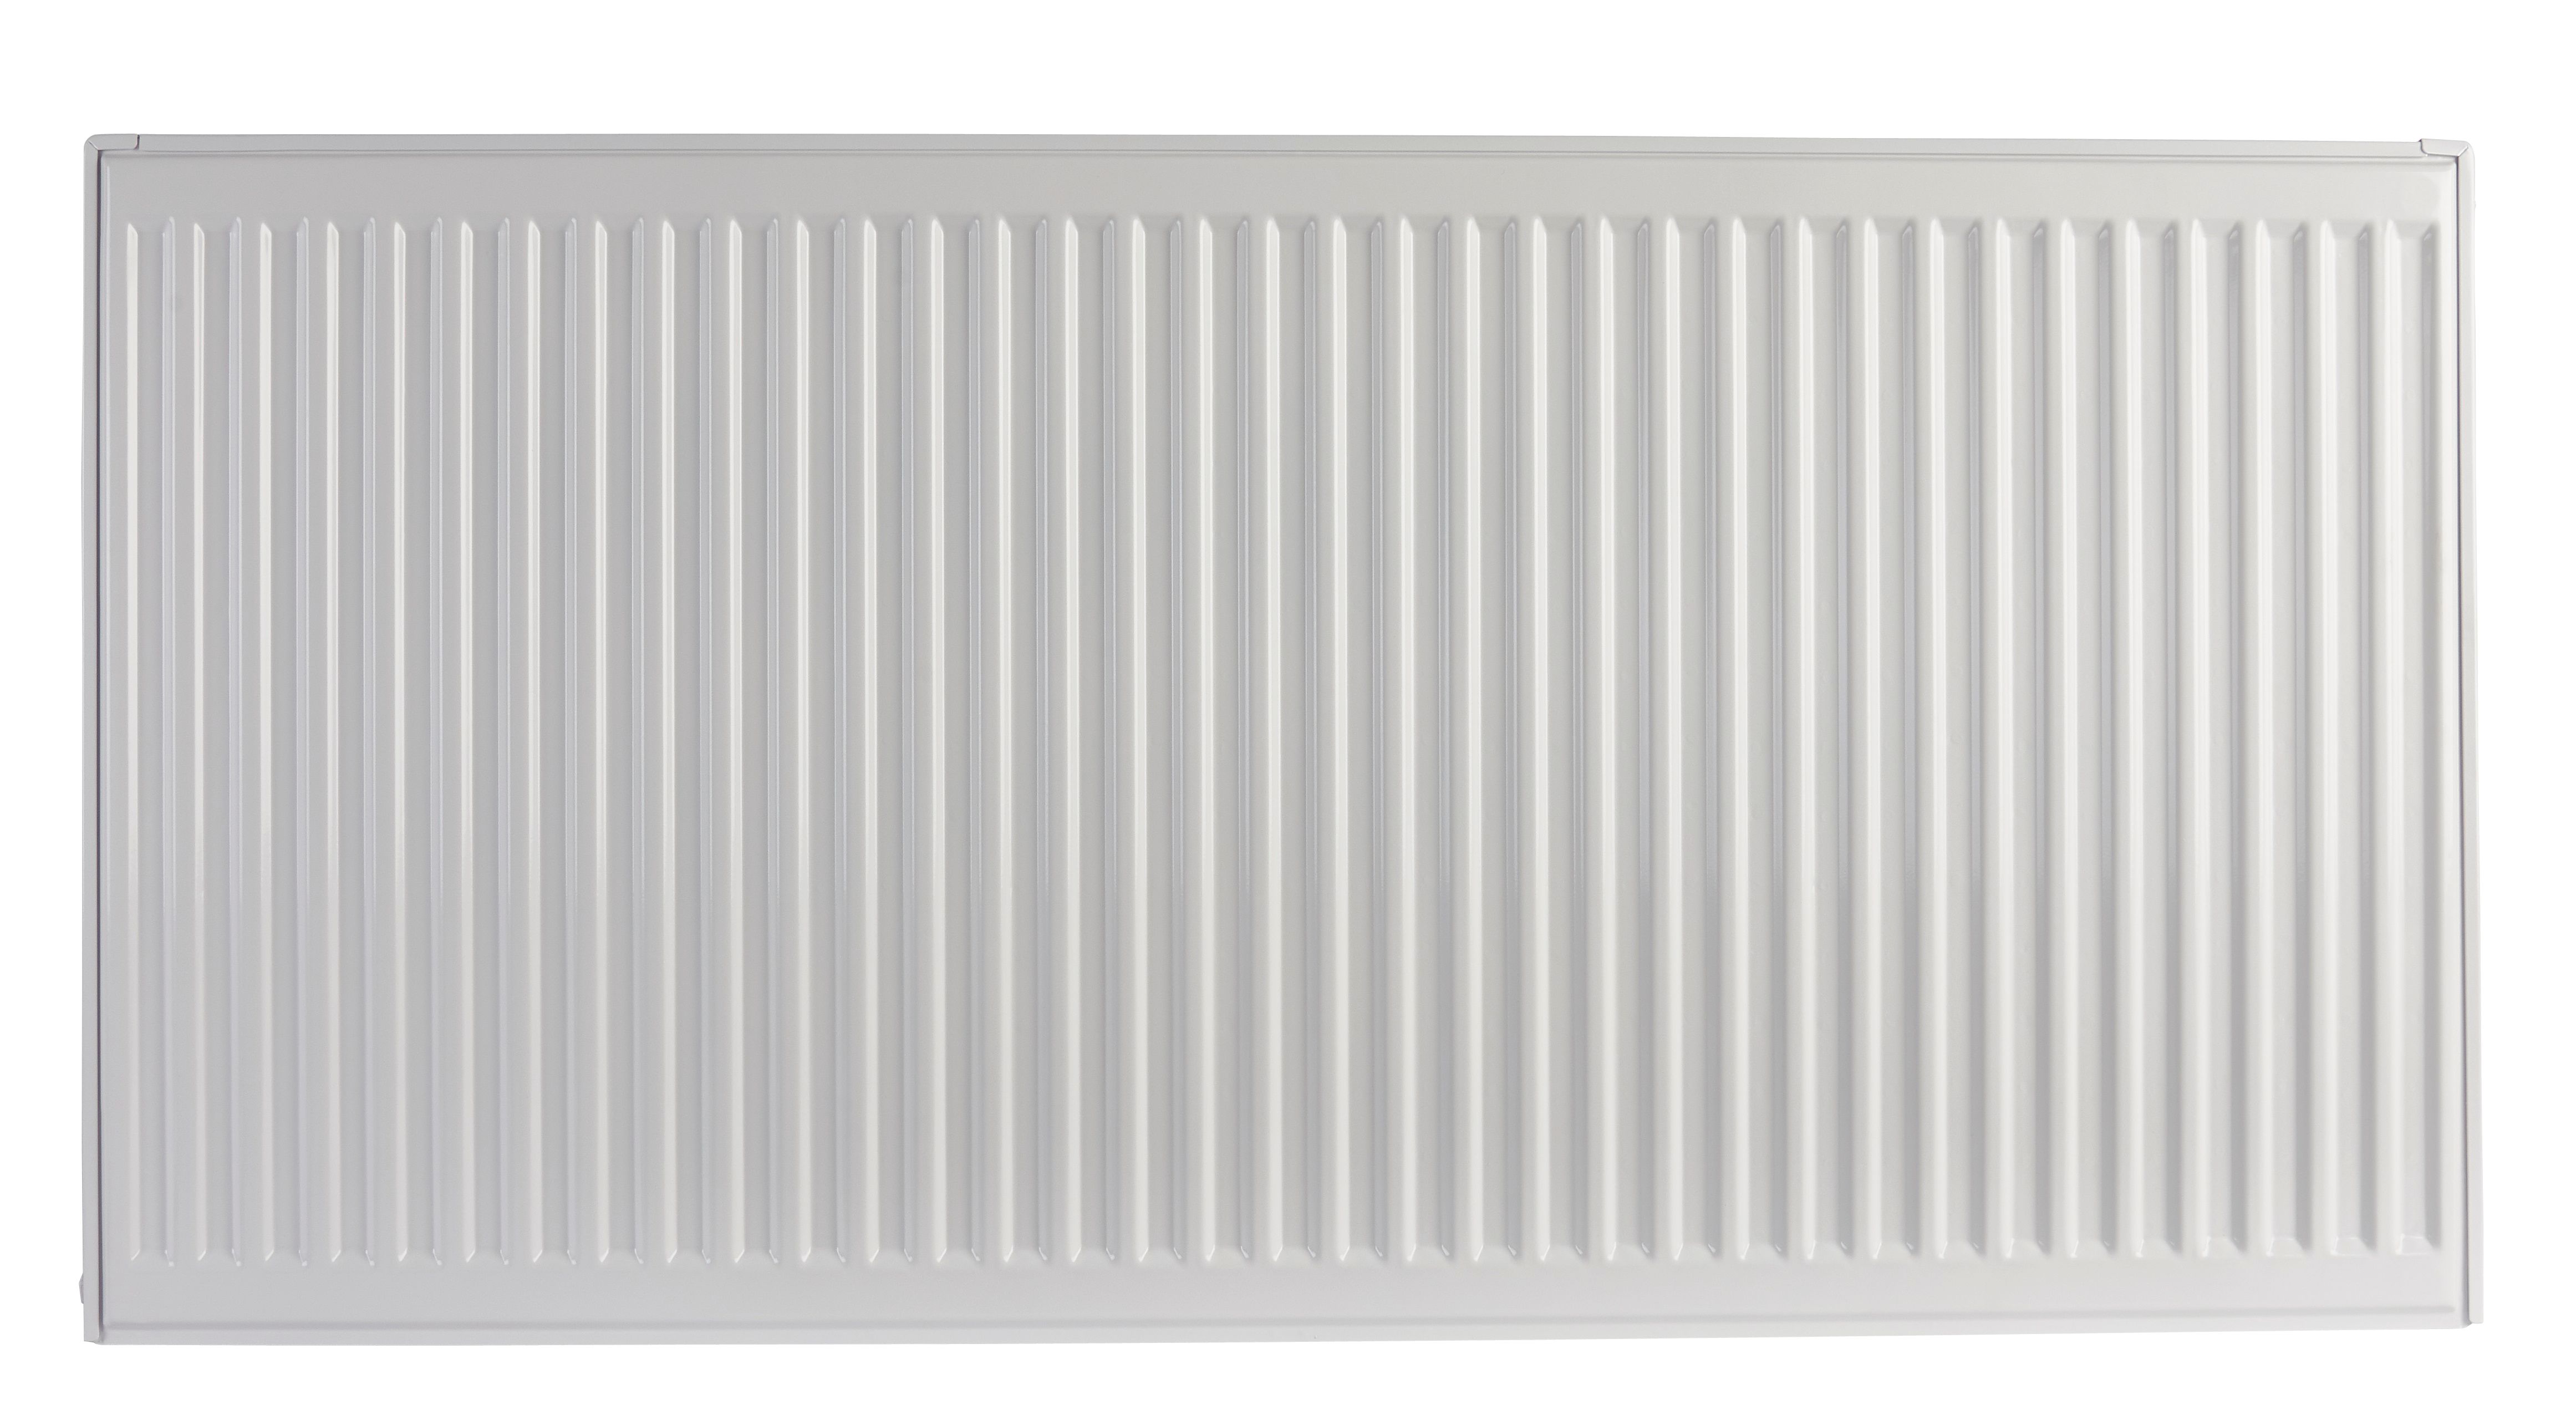 Image of Homeline by Stelrad 600 x 1600mm Type 22 Double Panel Premium Double Convector Radiator